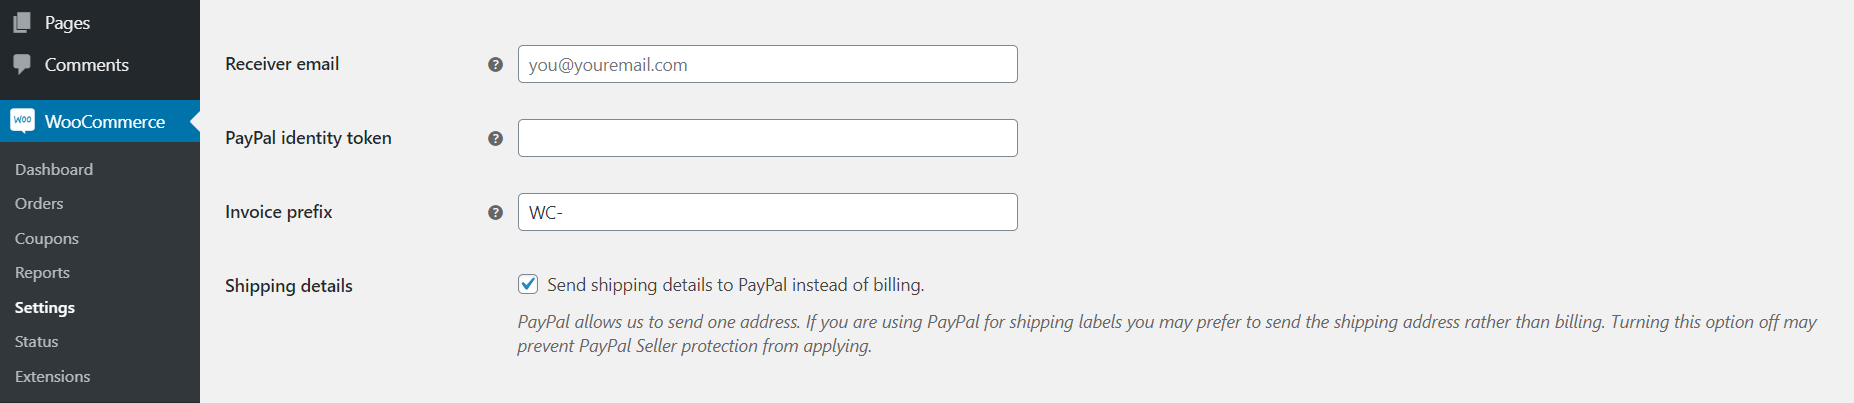 Configuring your PayPal settings.